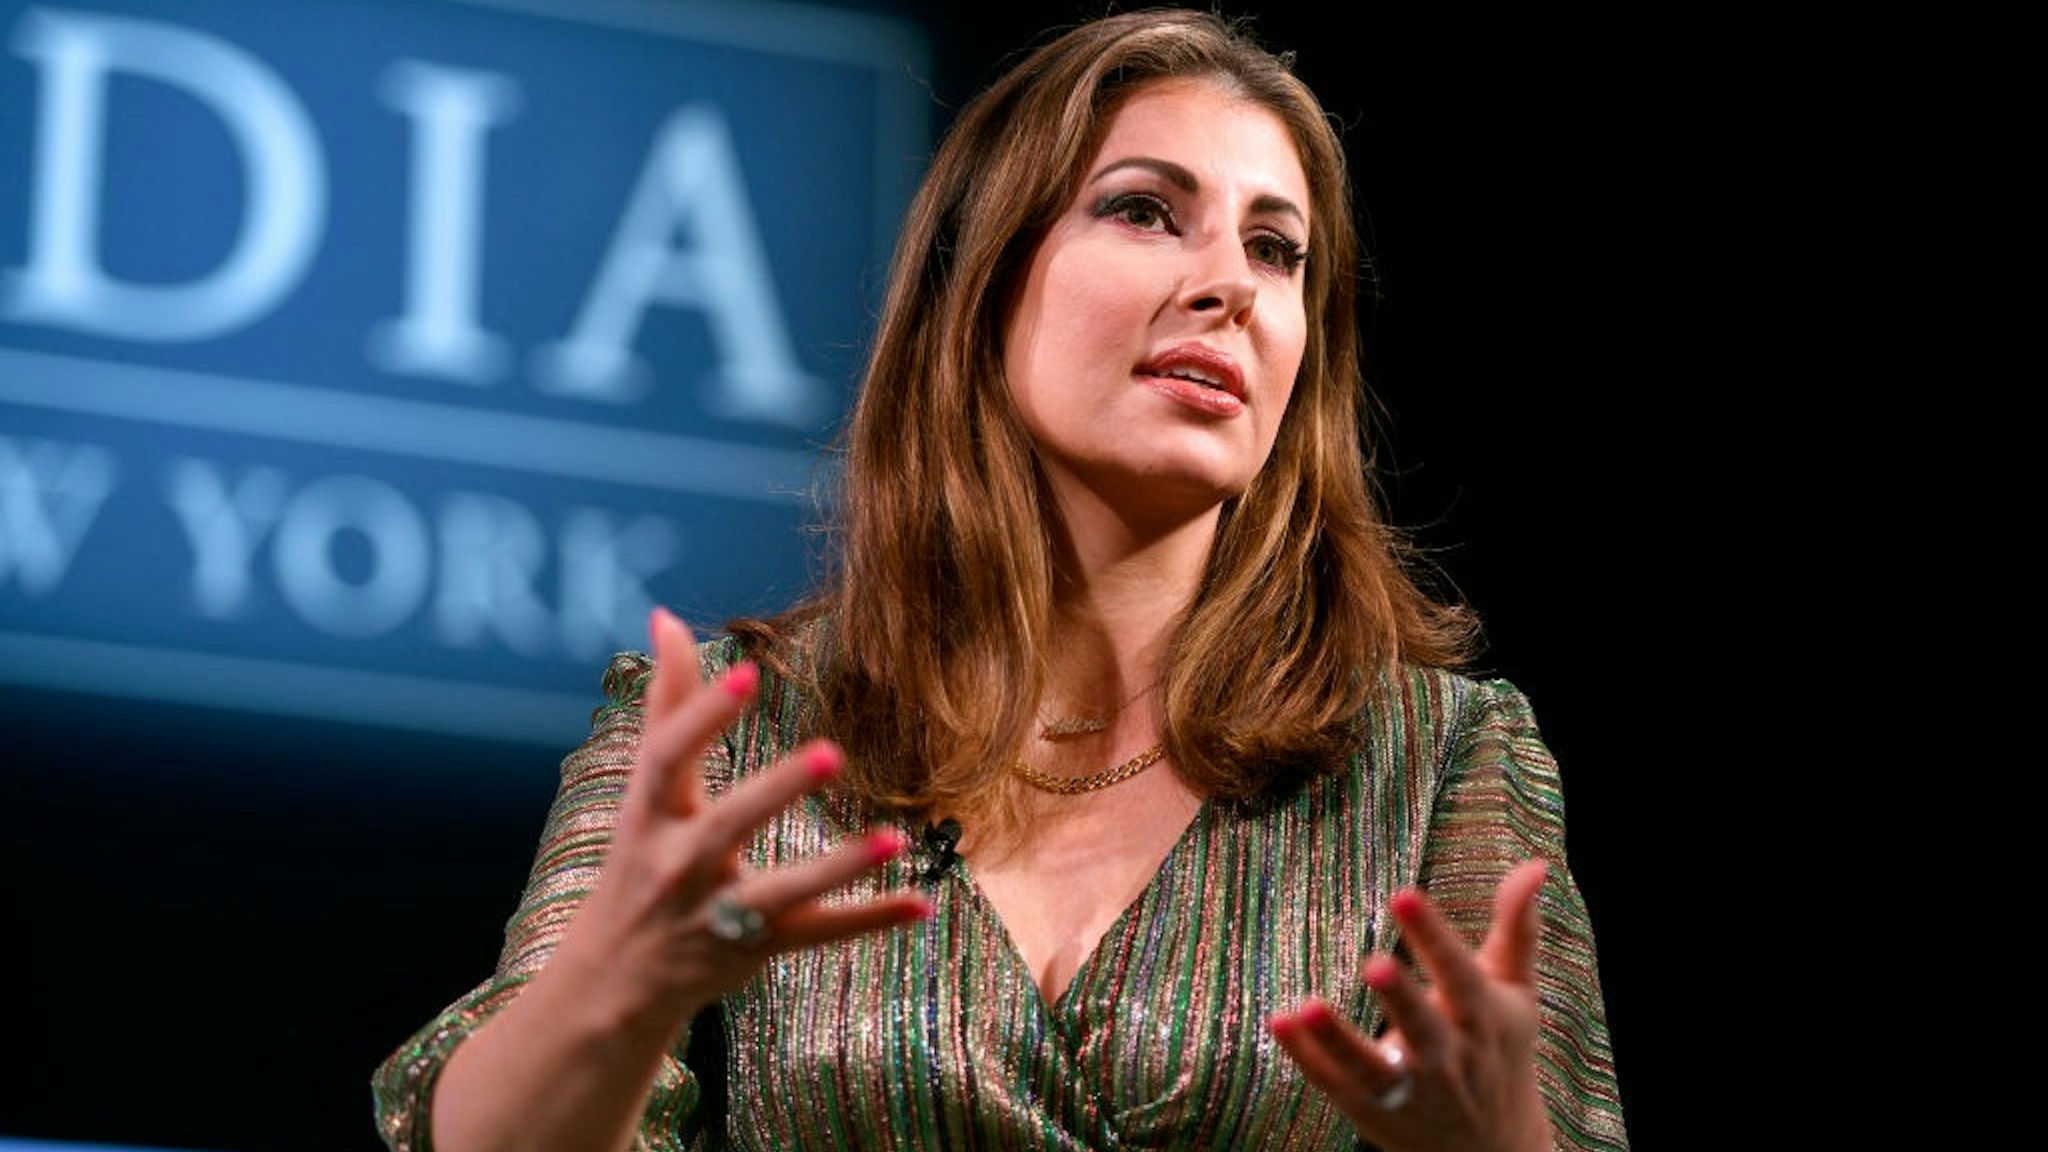 NEW YORK, NEW YORK - SEPTEMBER 21: Morgan Ortagus, Partner, Rubicon Founders speaks onstage during the 2021 Concordia Annual Summit - Day 2 at Sheraton New York on September 21, 2021 in New York City.